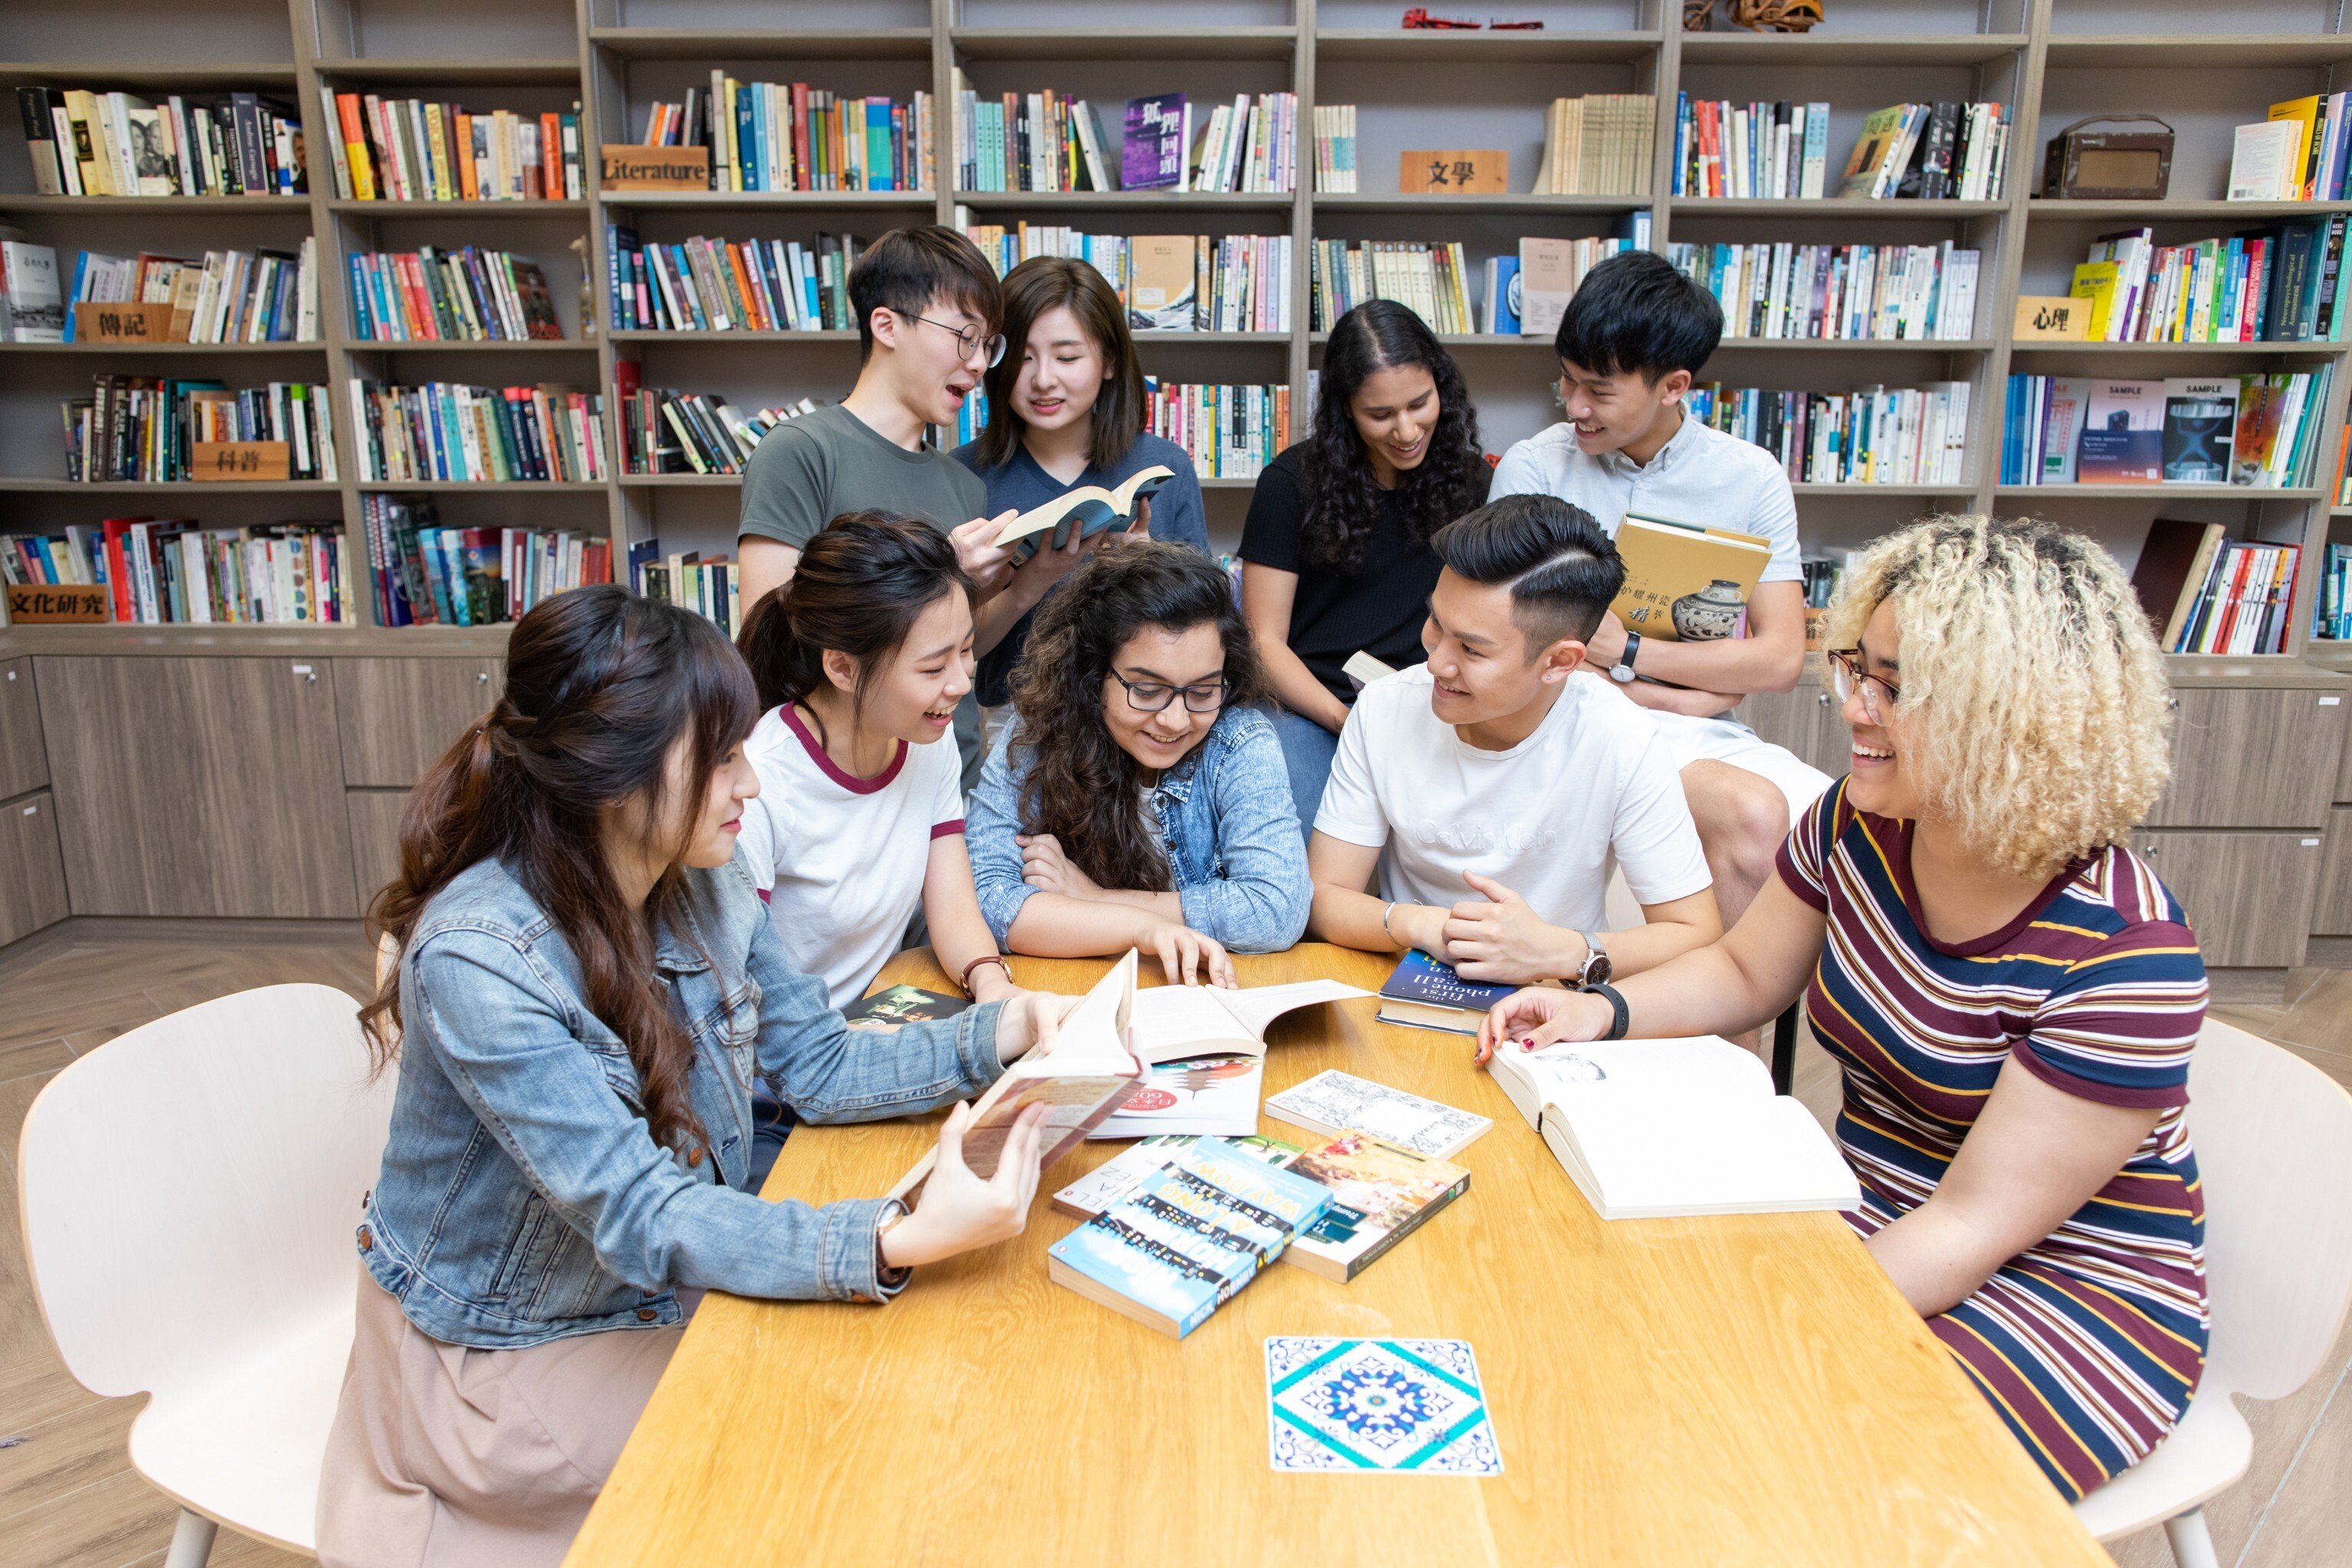 Hong Kong’s Lingnan University was ranked second in the world for its students’ ‘quality education’ – one of the United Nations Sustainable Development Goals – in the Times Higher Education Impact Rankings 2020.